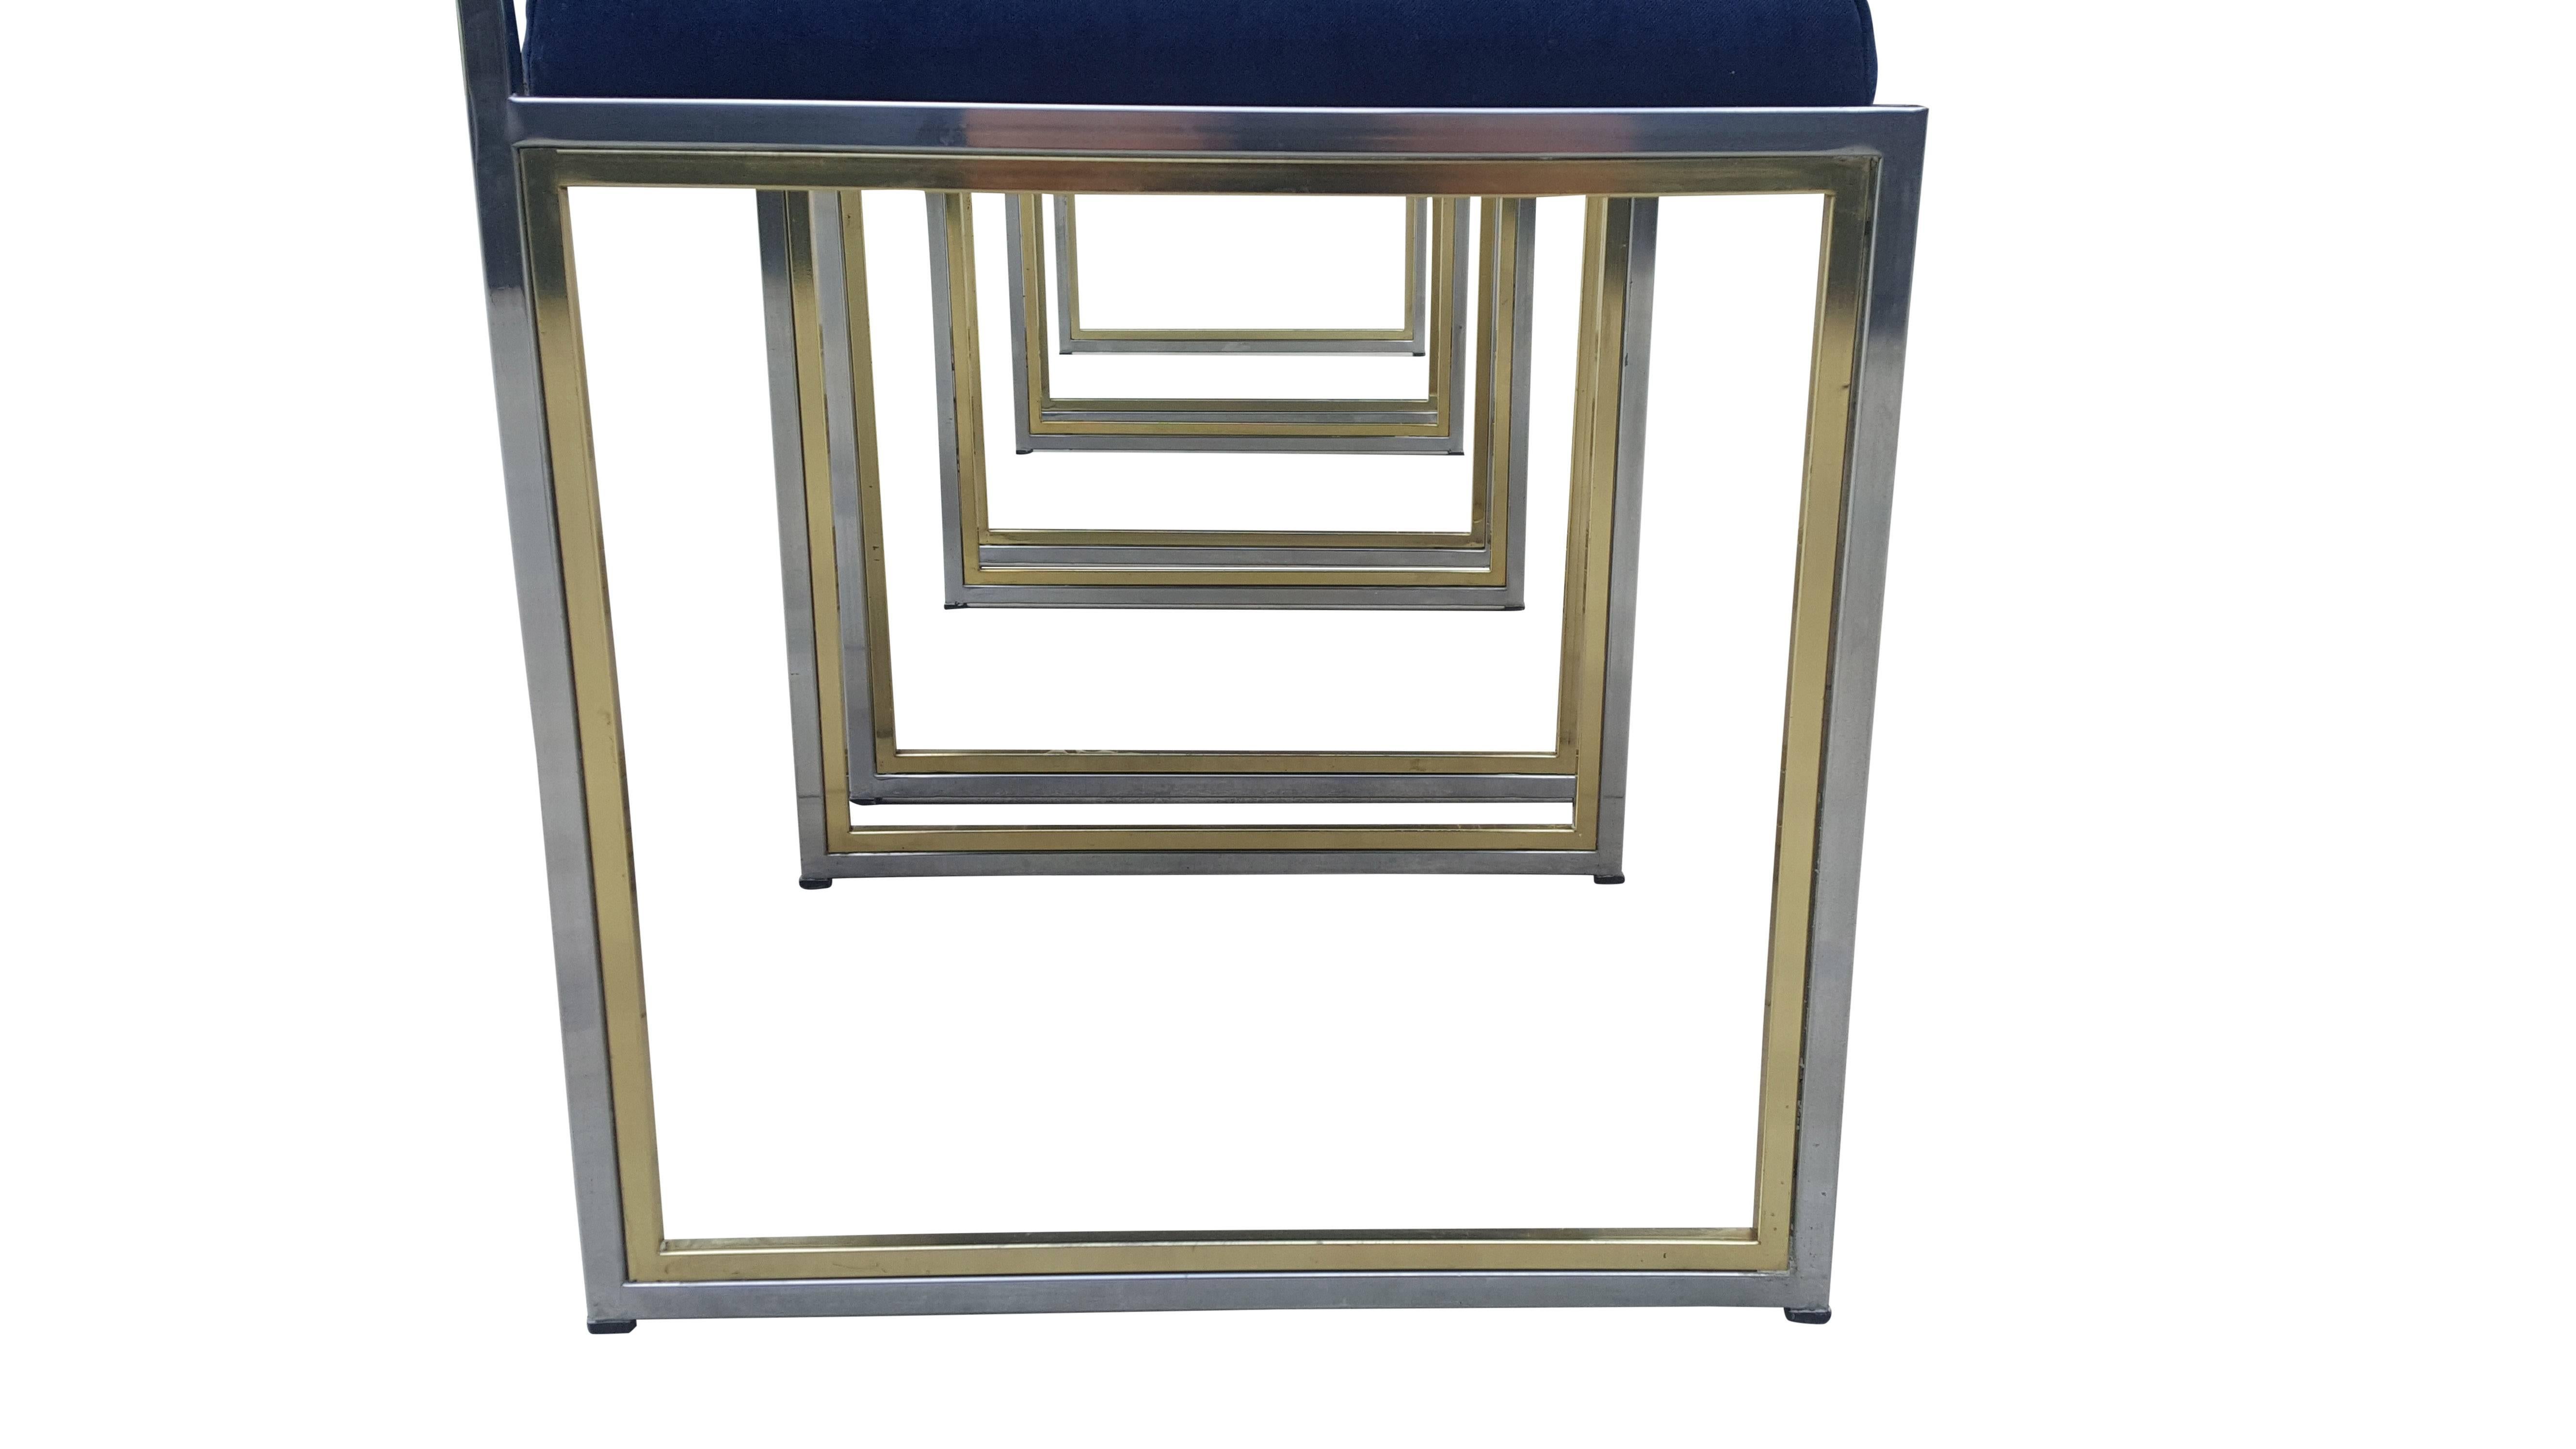 Set of four Willy Rizzo chairs in brass and chrome.
Made in Italy in the 1970s
In the style of Maison Jansen.